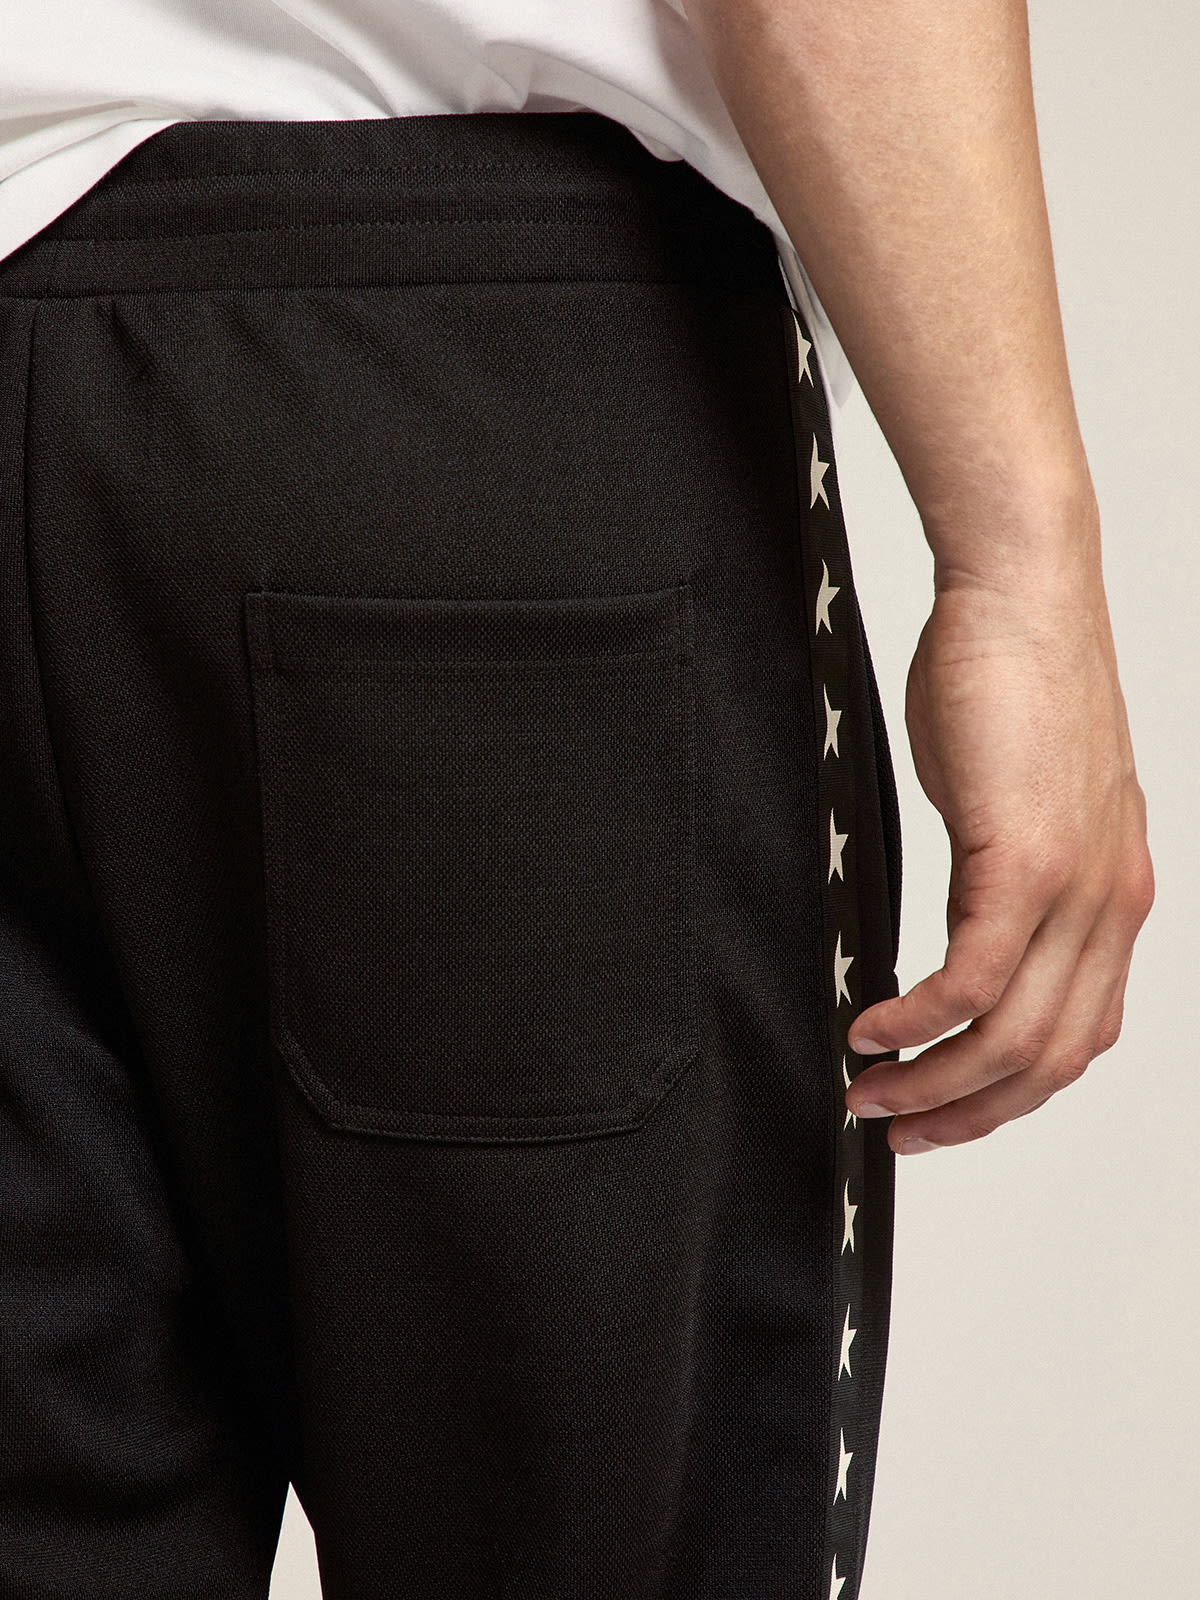 Golden Goose - Black joggers with white stars on the sides in 